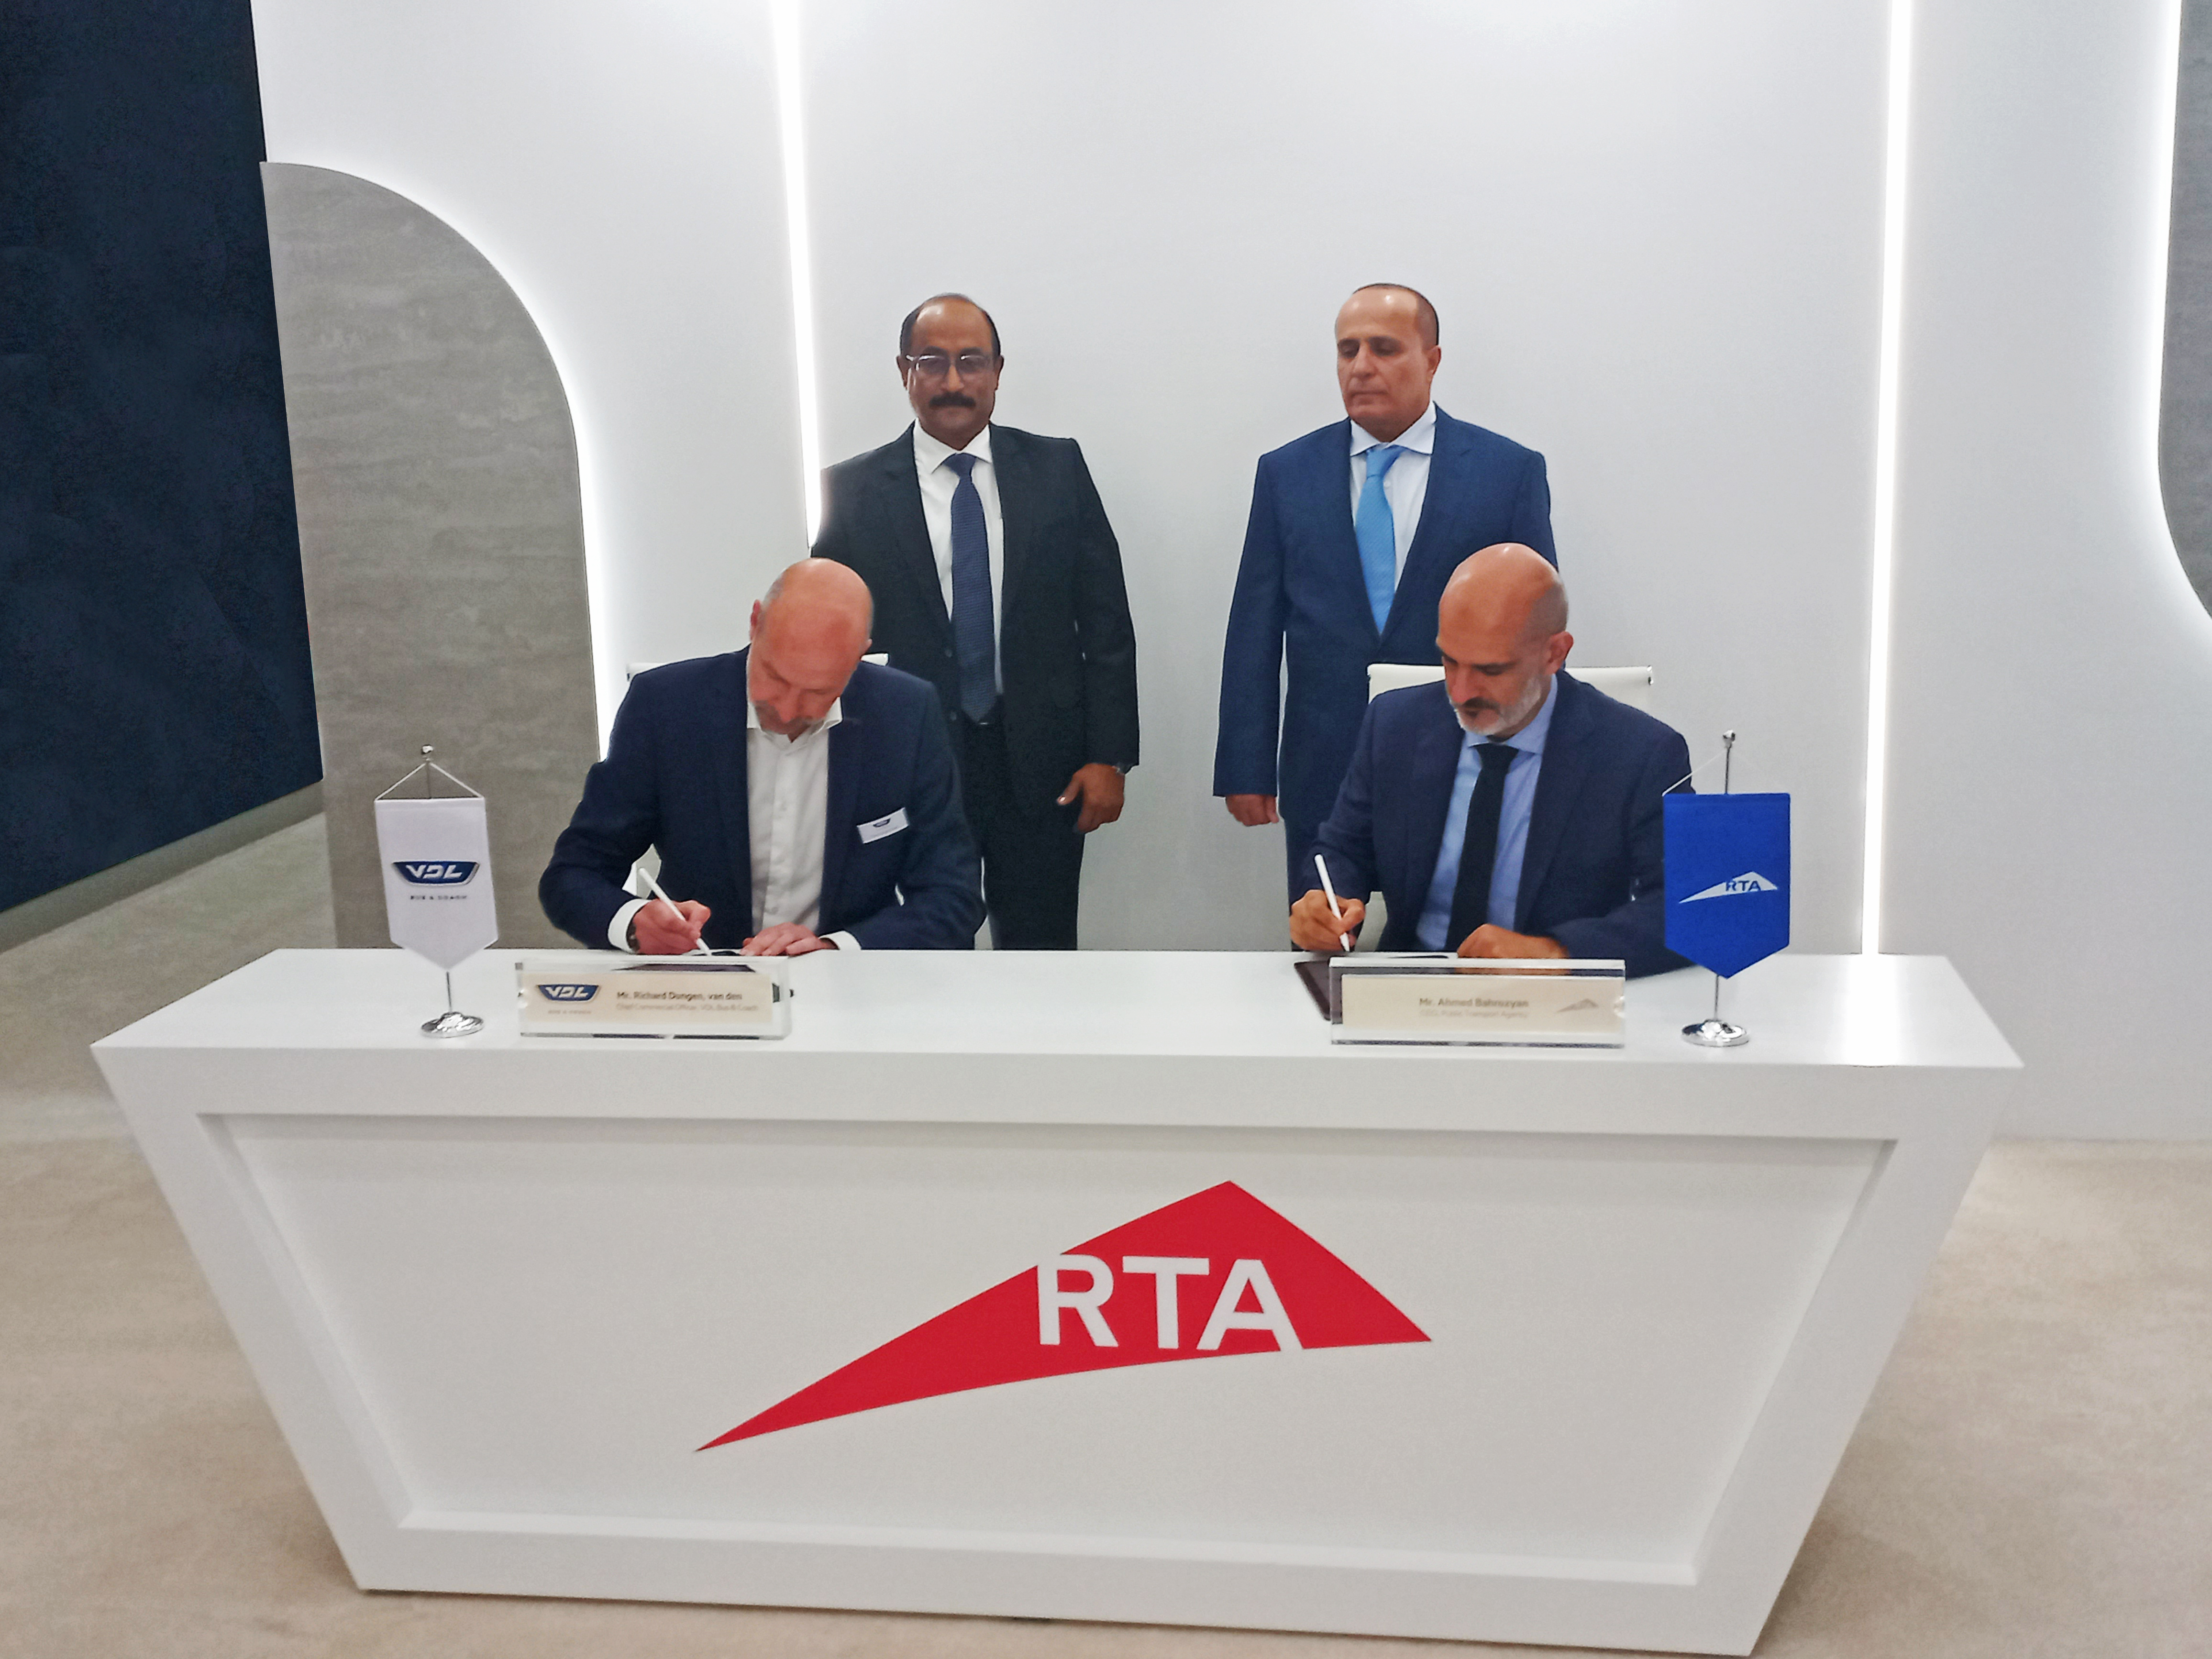 VDL signs zero-emission MOU with RTA